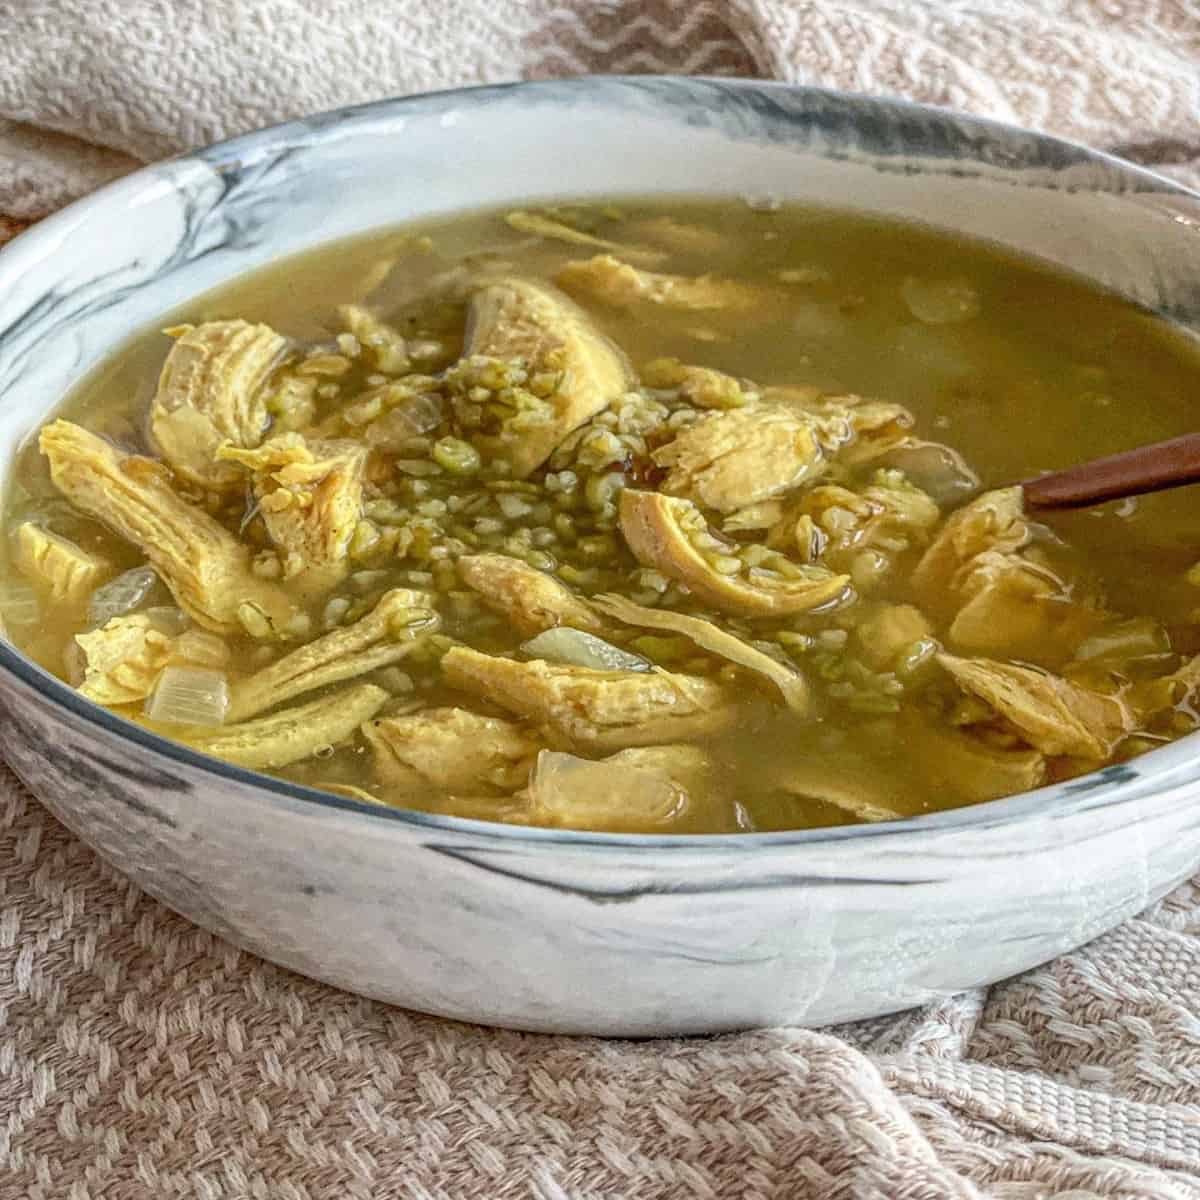 A bowl of durum wheat chicken soup made with durum wheat, chicken breasts, onions, seven spices, and turmeric